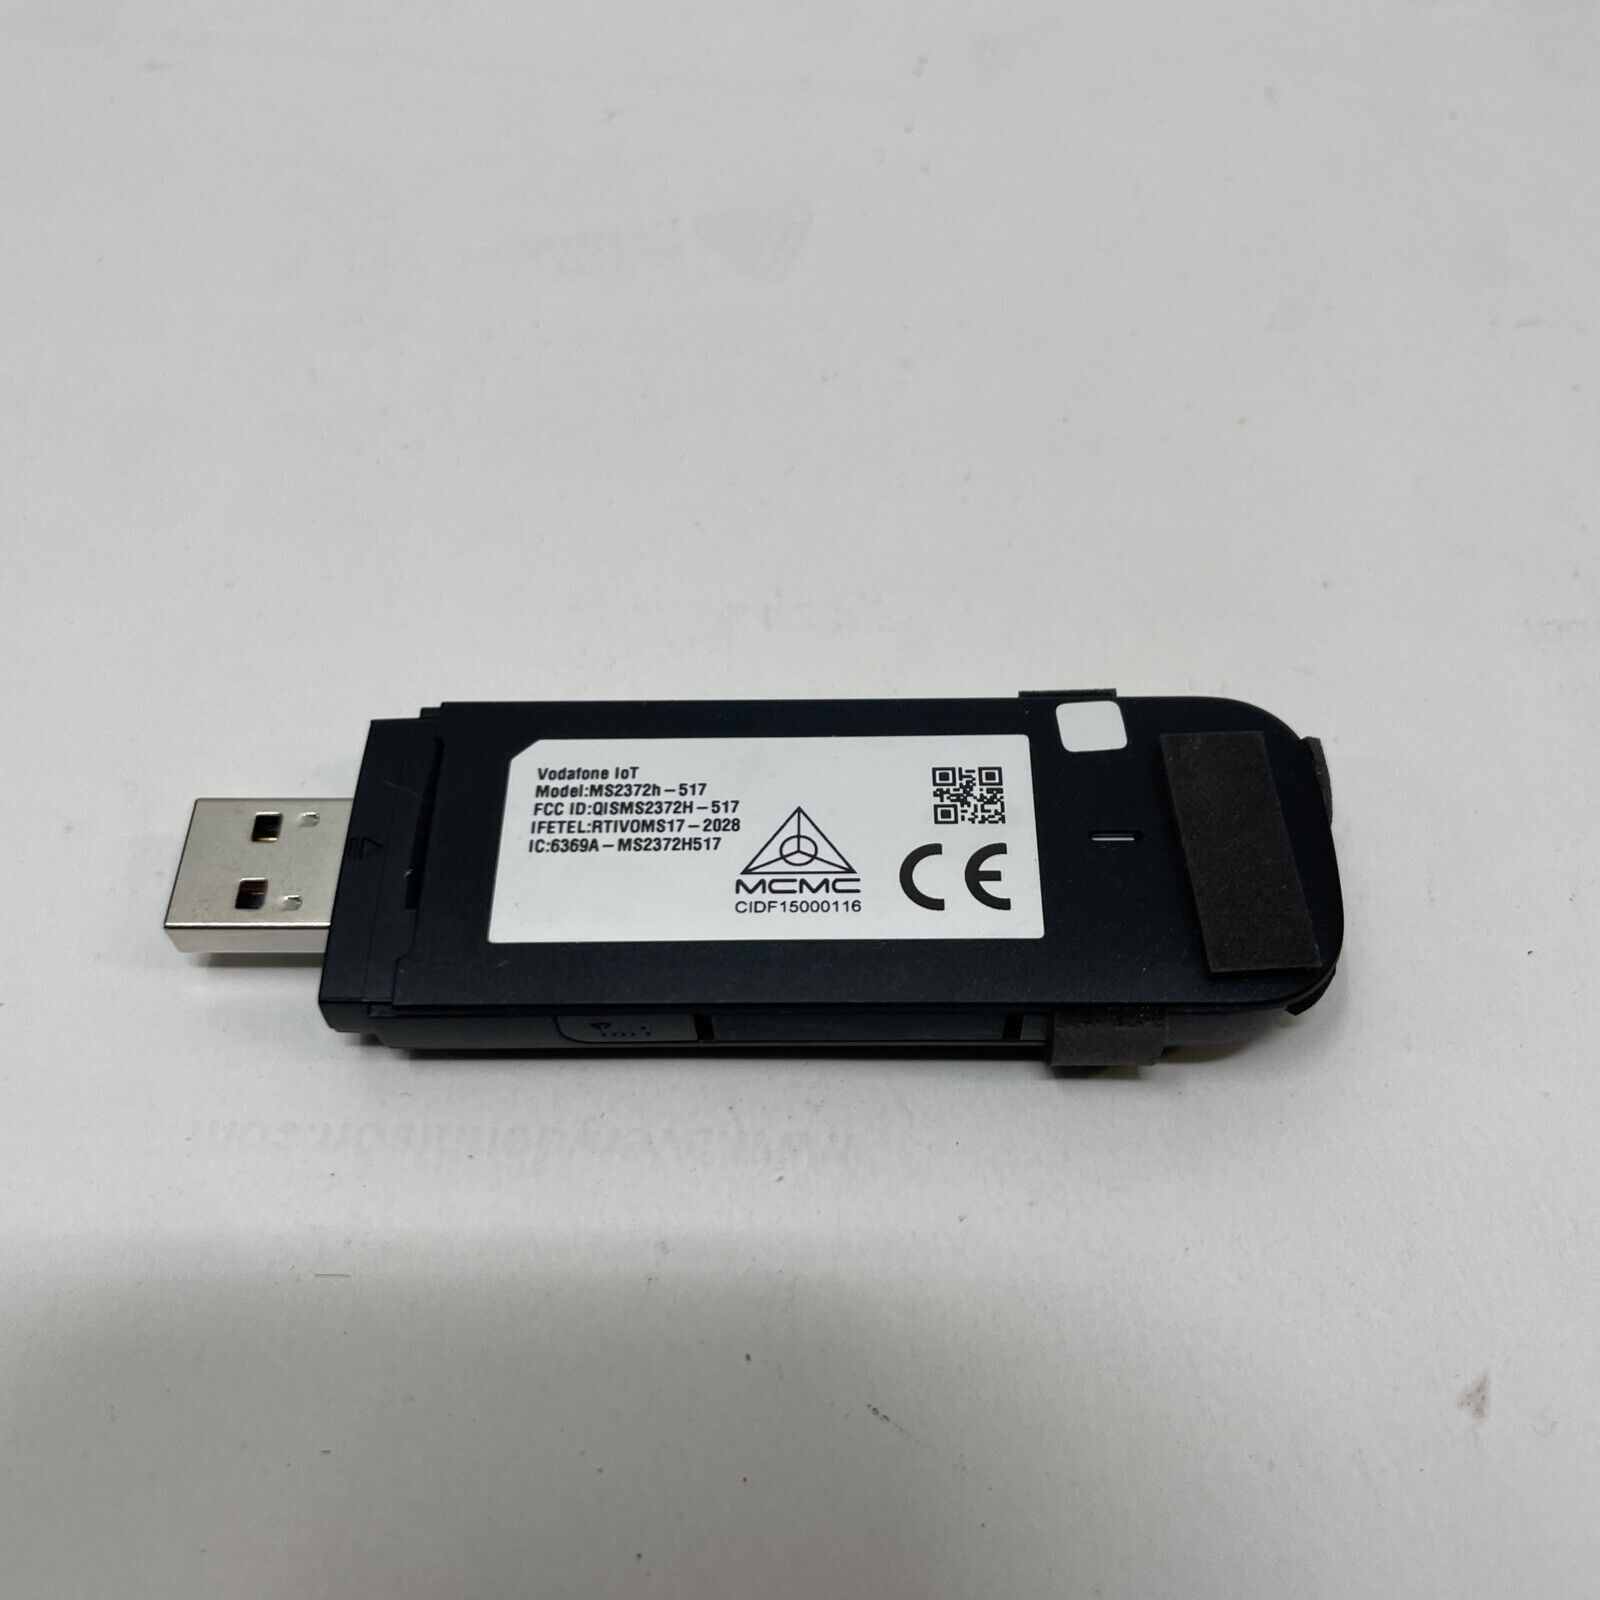 Huawei 4G LTE Cat4 Industrial Iot Dongle VODAFONE MS2372H-517 USB STICK